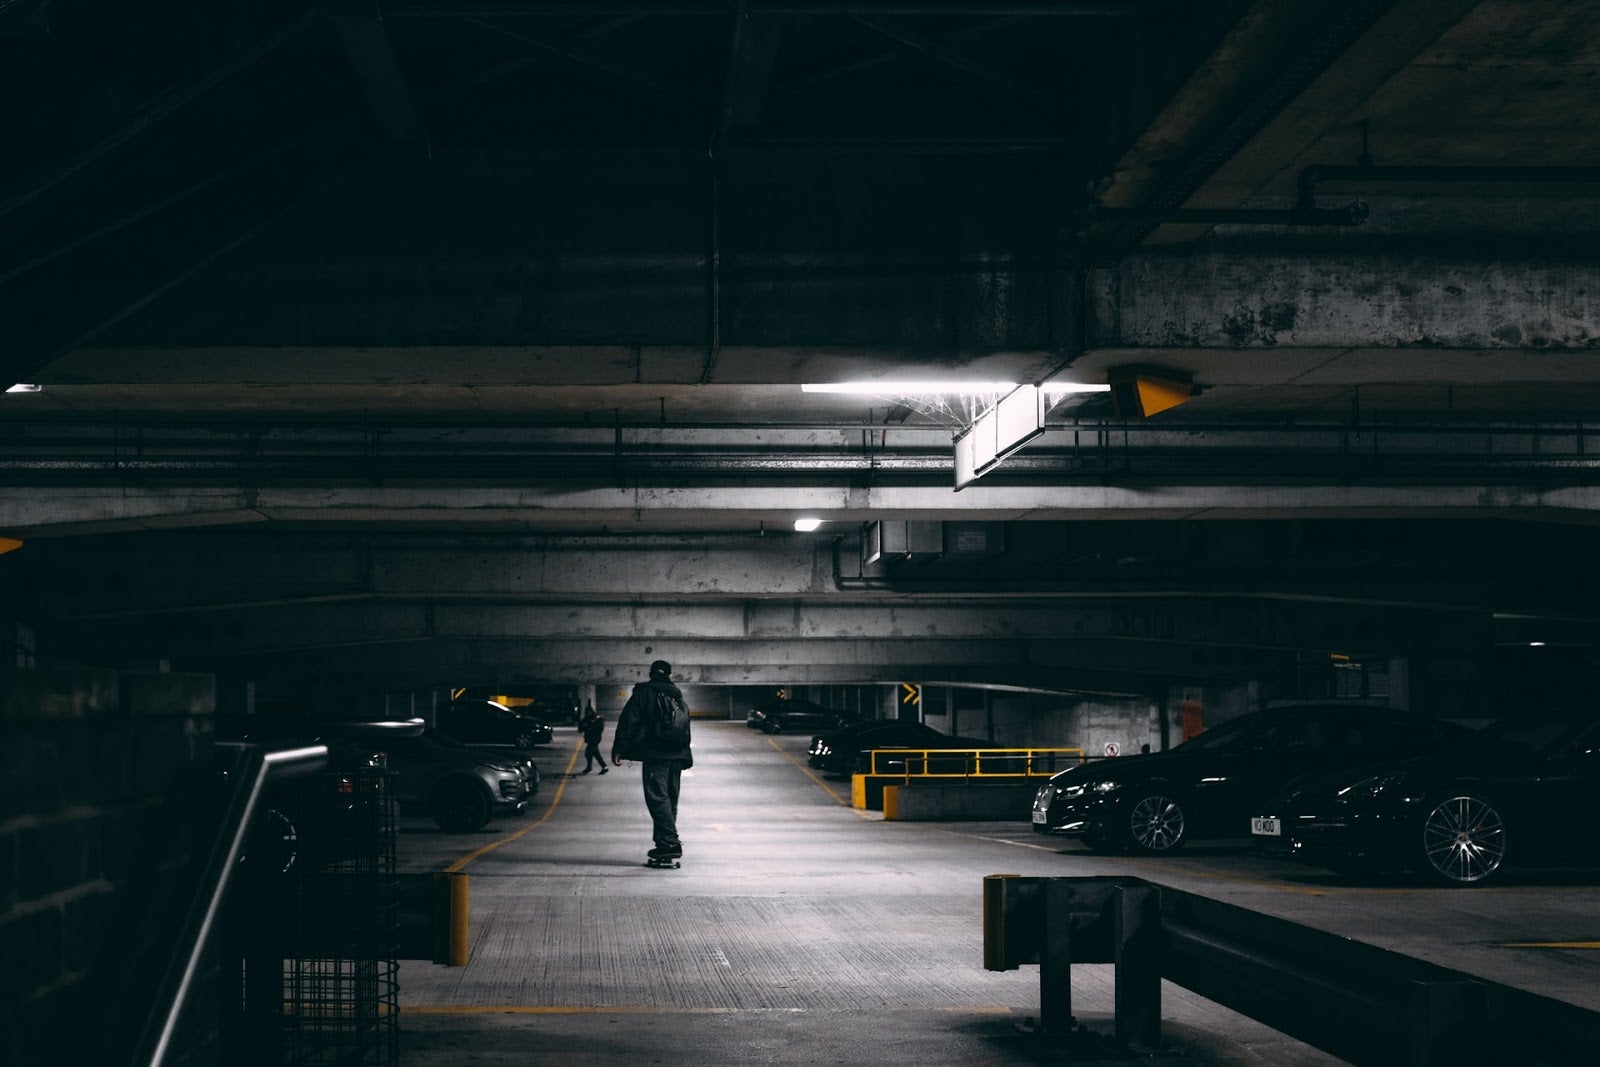 A darkened carpark where a lone man is watching someone getting into a car.